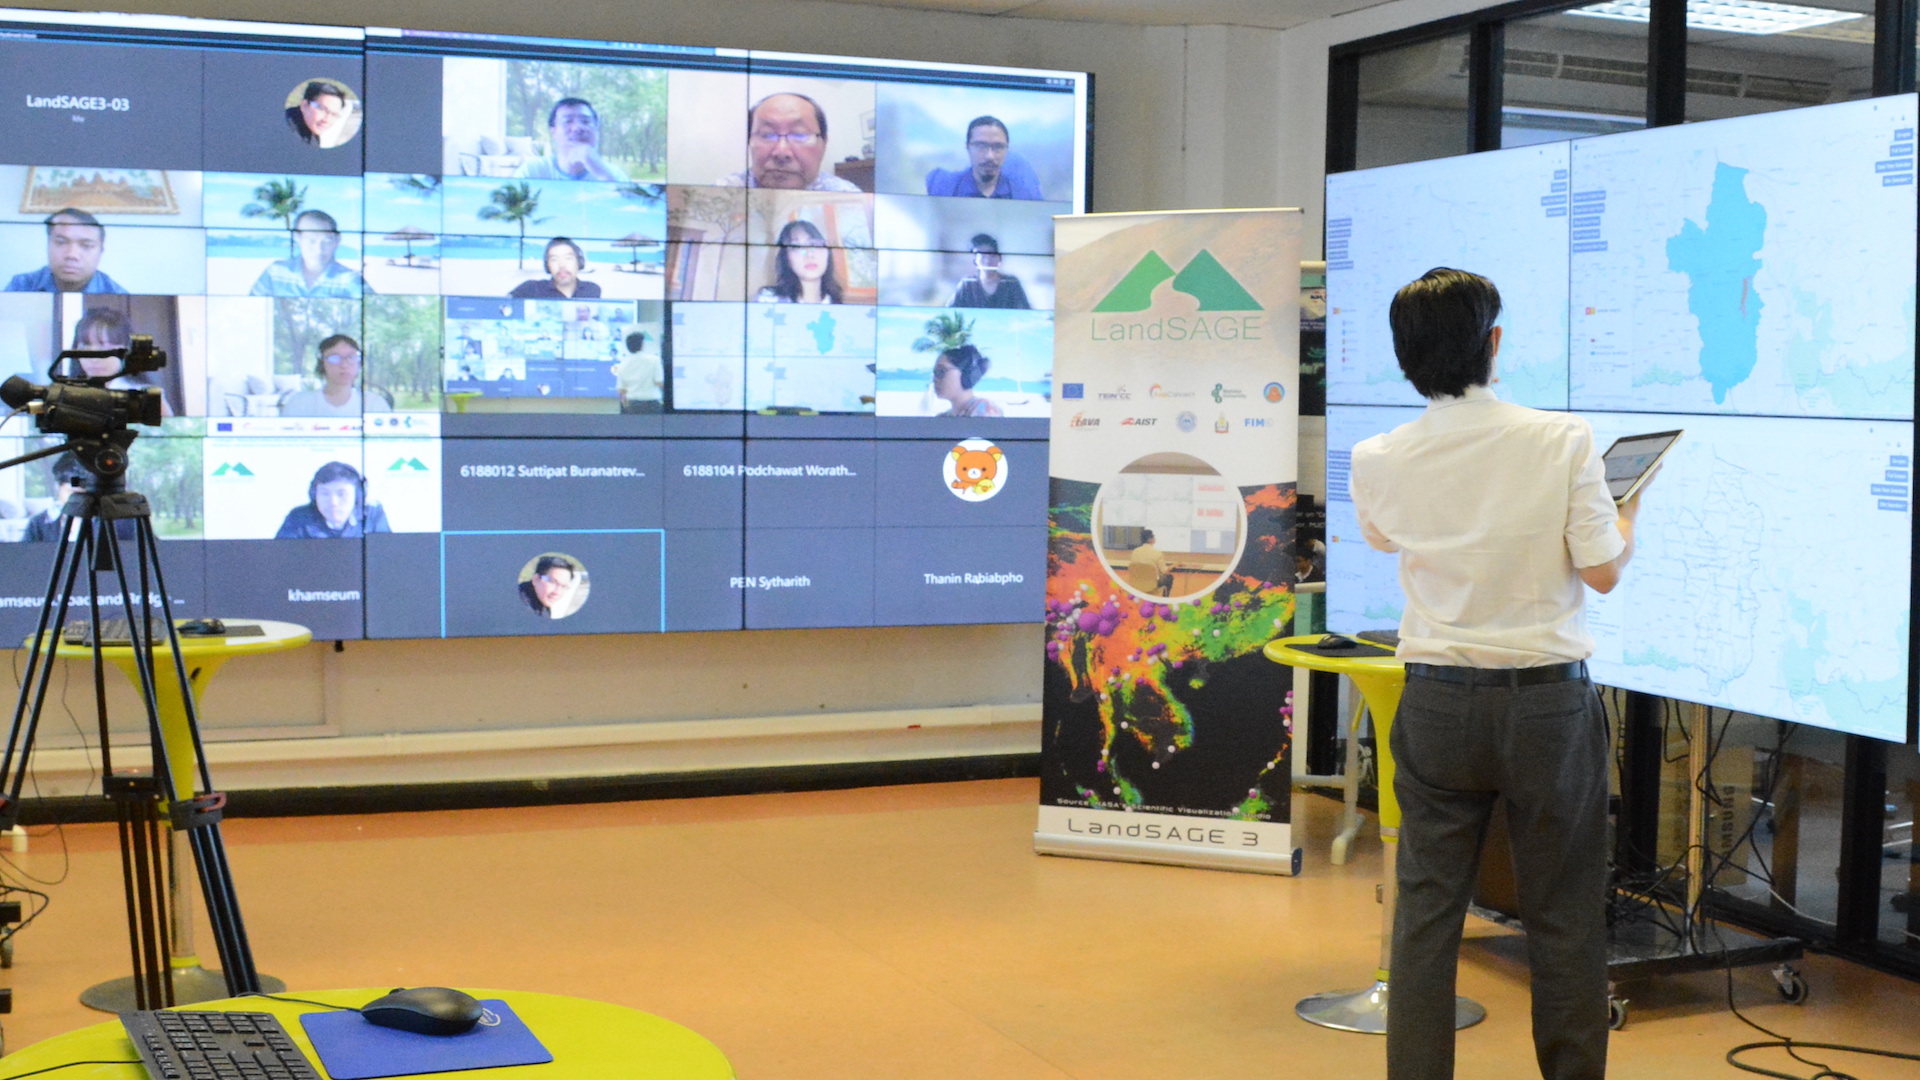 A man is giving a presentation in front of a screen. Visible in the background is a number of people teleconferencing in